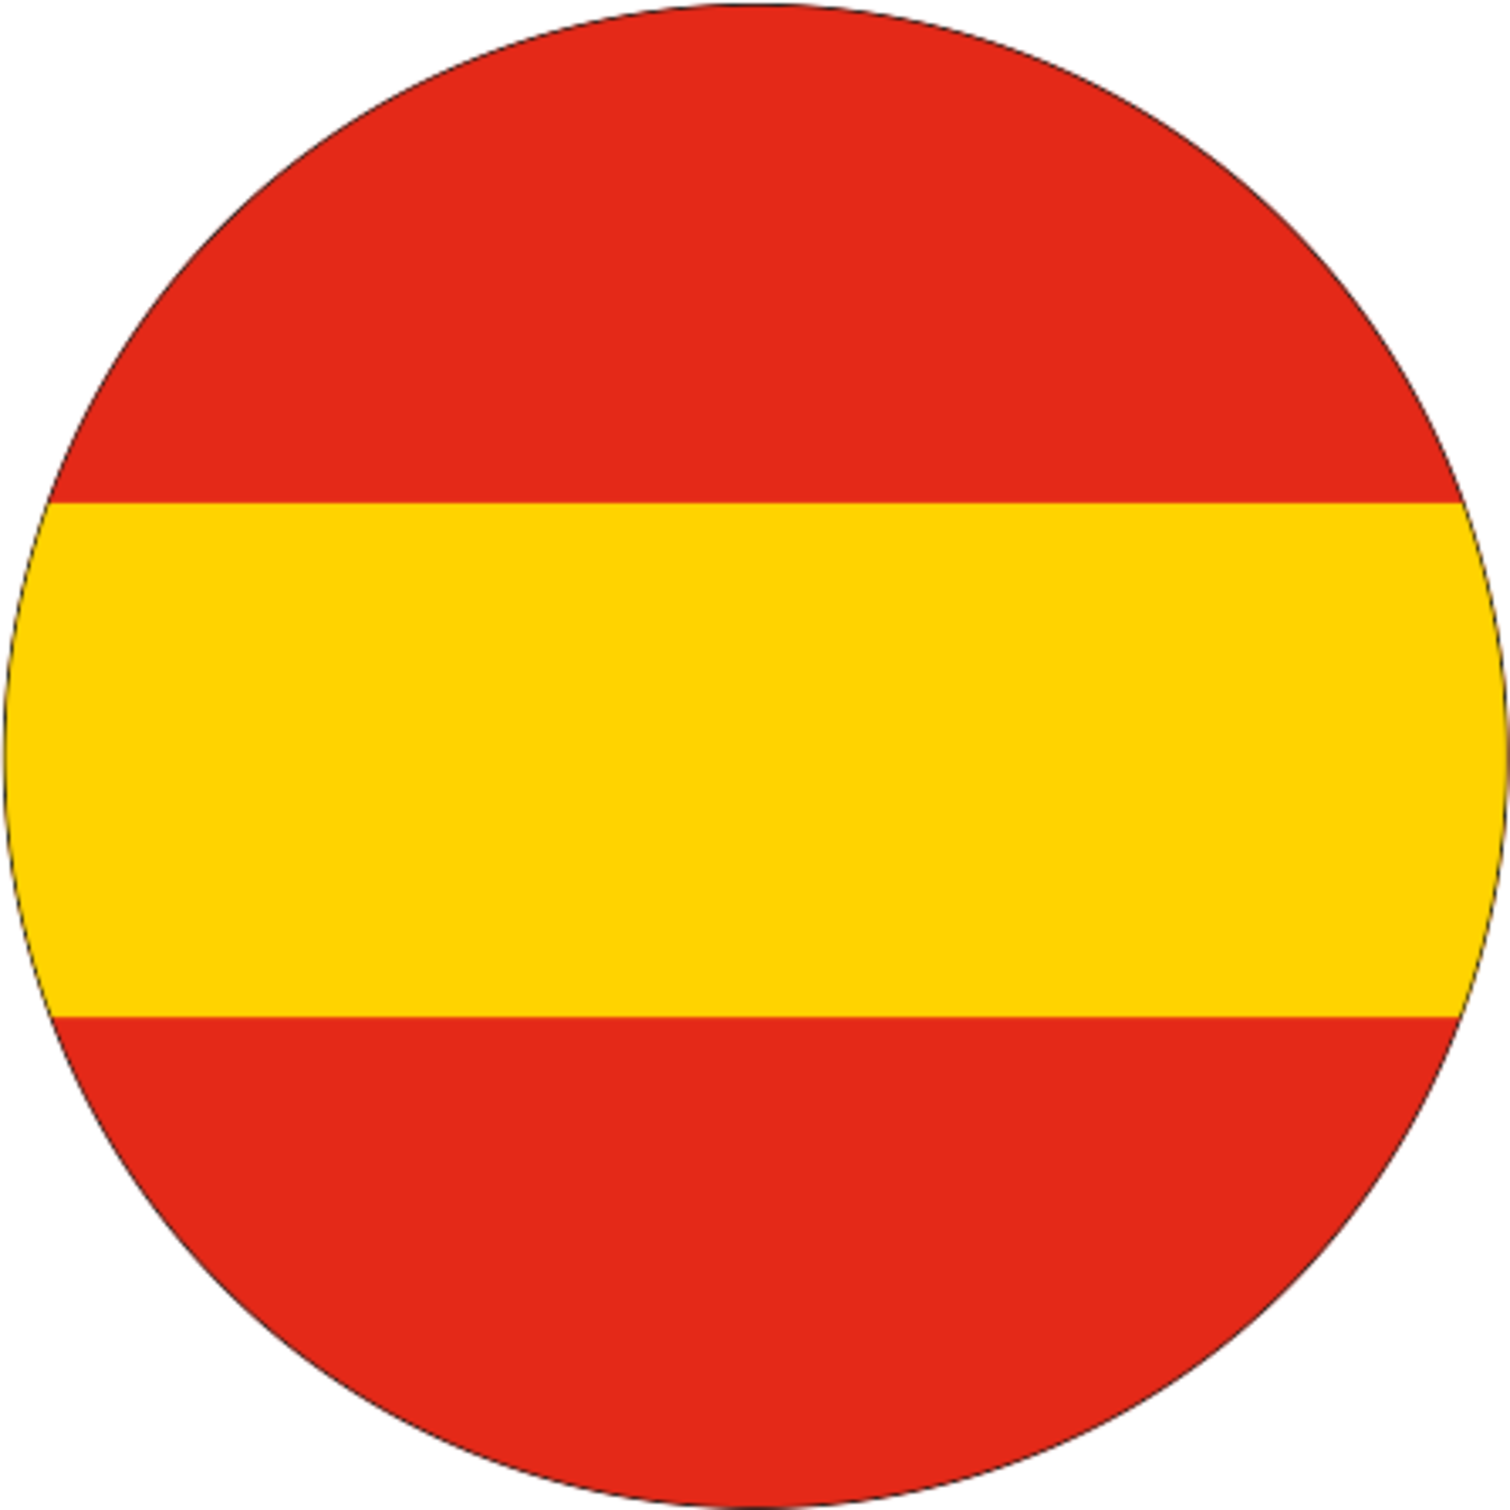 Flag of Spain in a circle